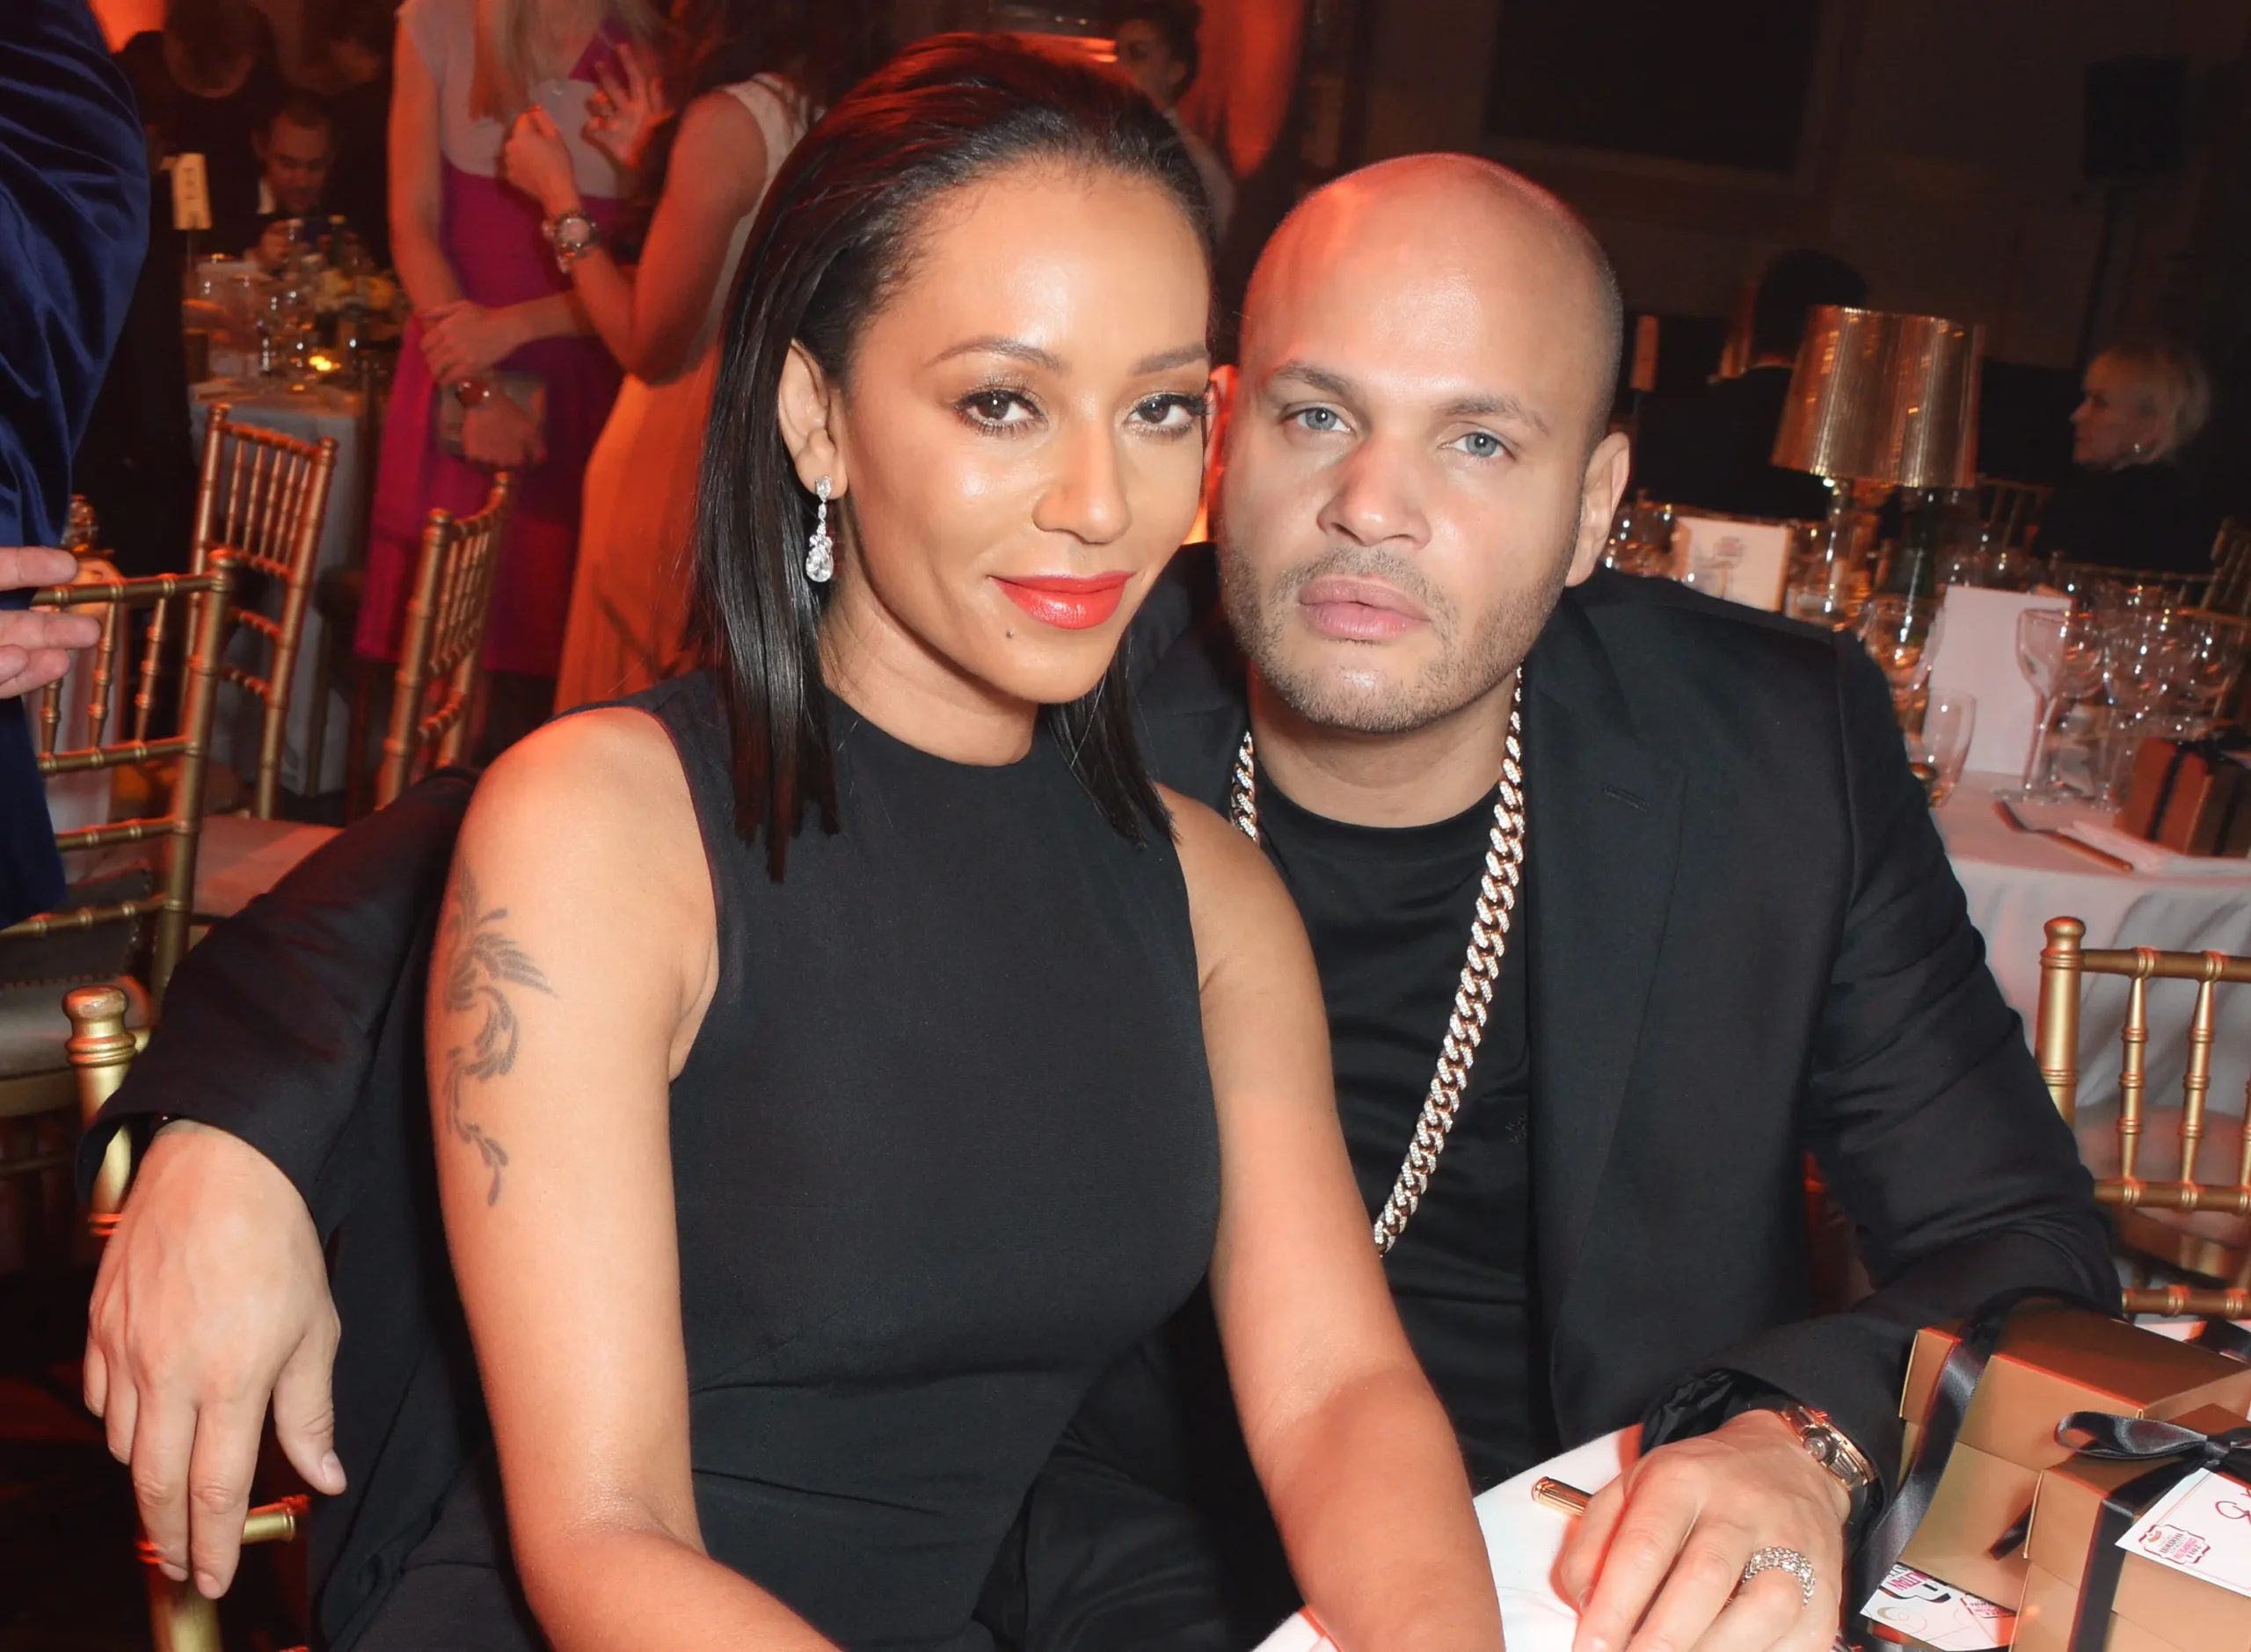 Say What Now? Mel B Served $5 Million Defamation Lawsuit from Ex-Husband Stephen Belafonte on Her 49th Birthday